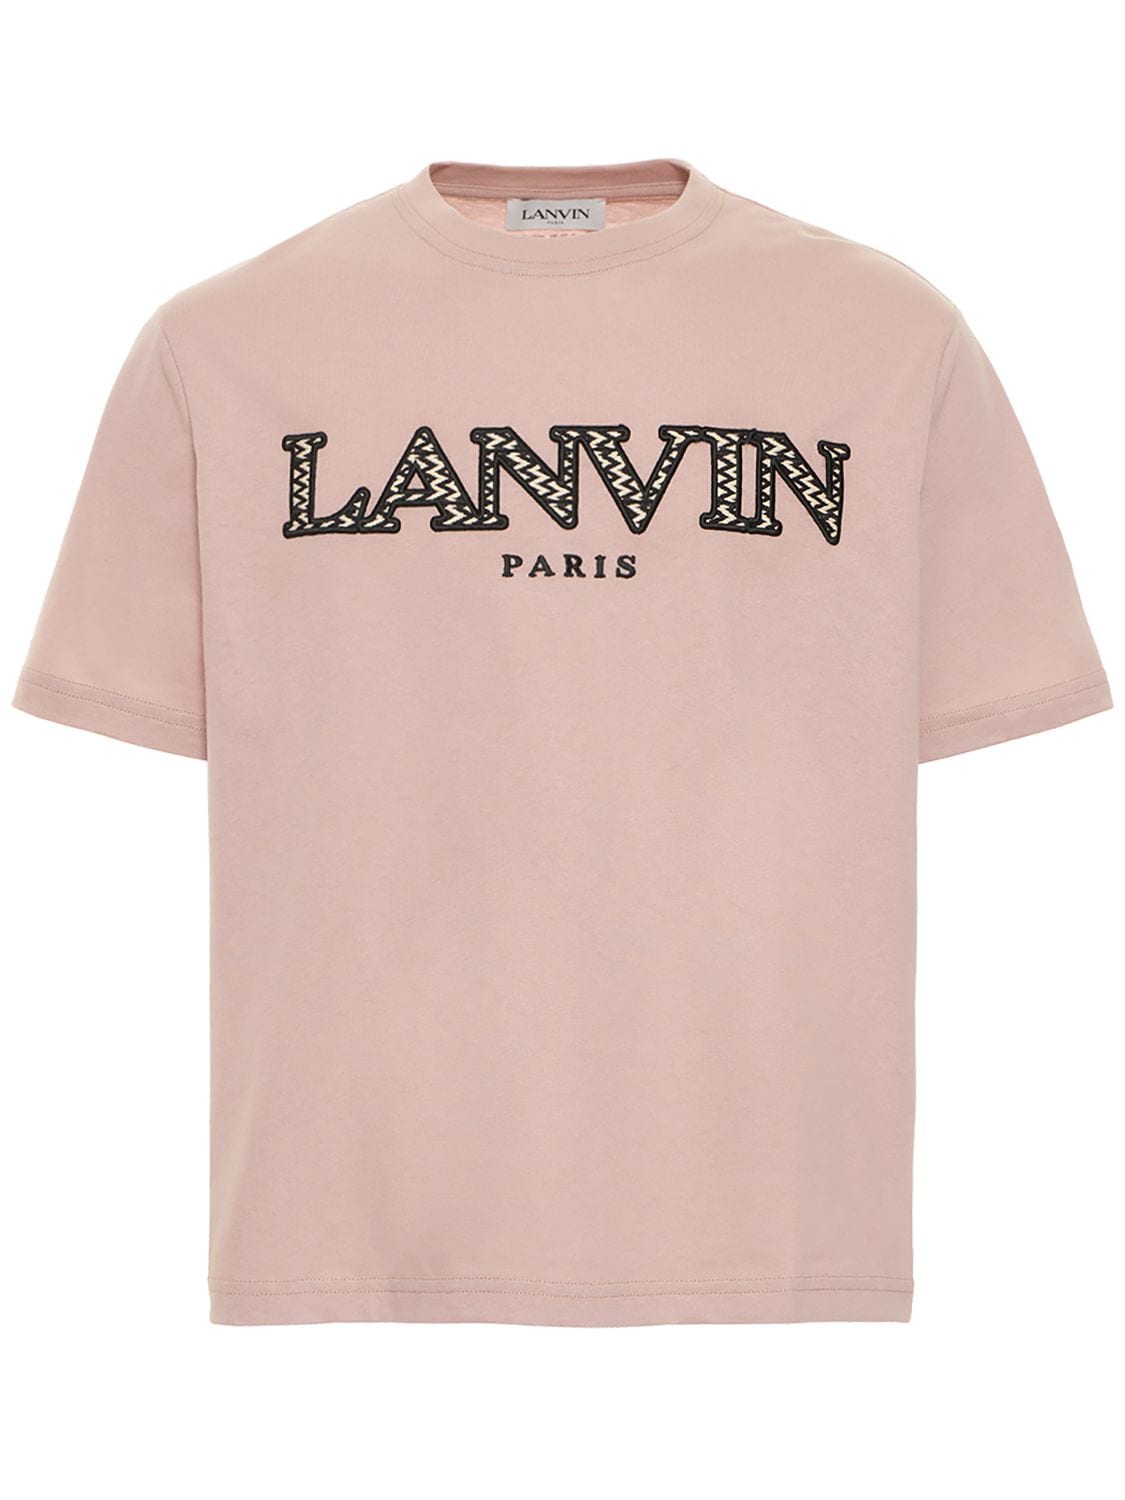 Lanvin Curb Logo Embroidery Cotton T-shirt In Light Pink